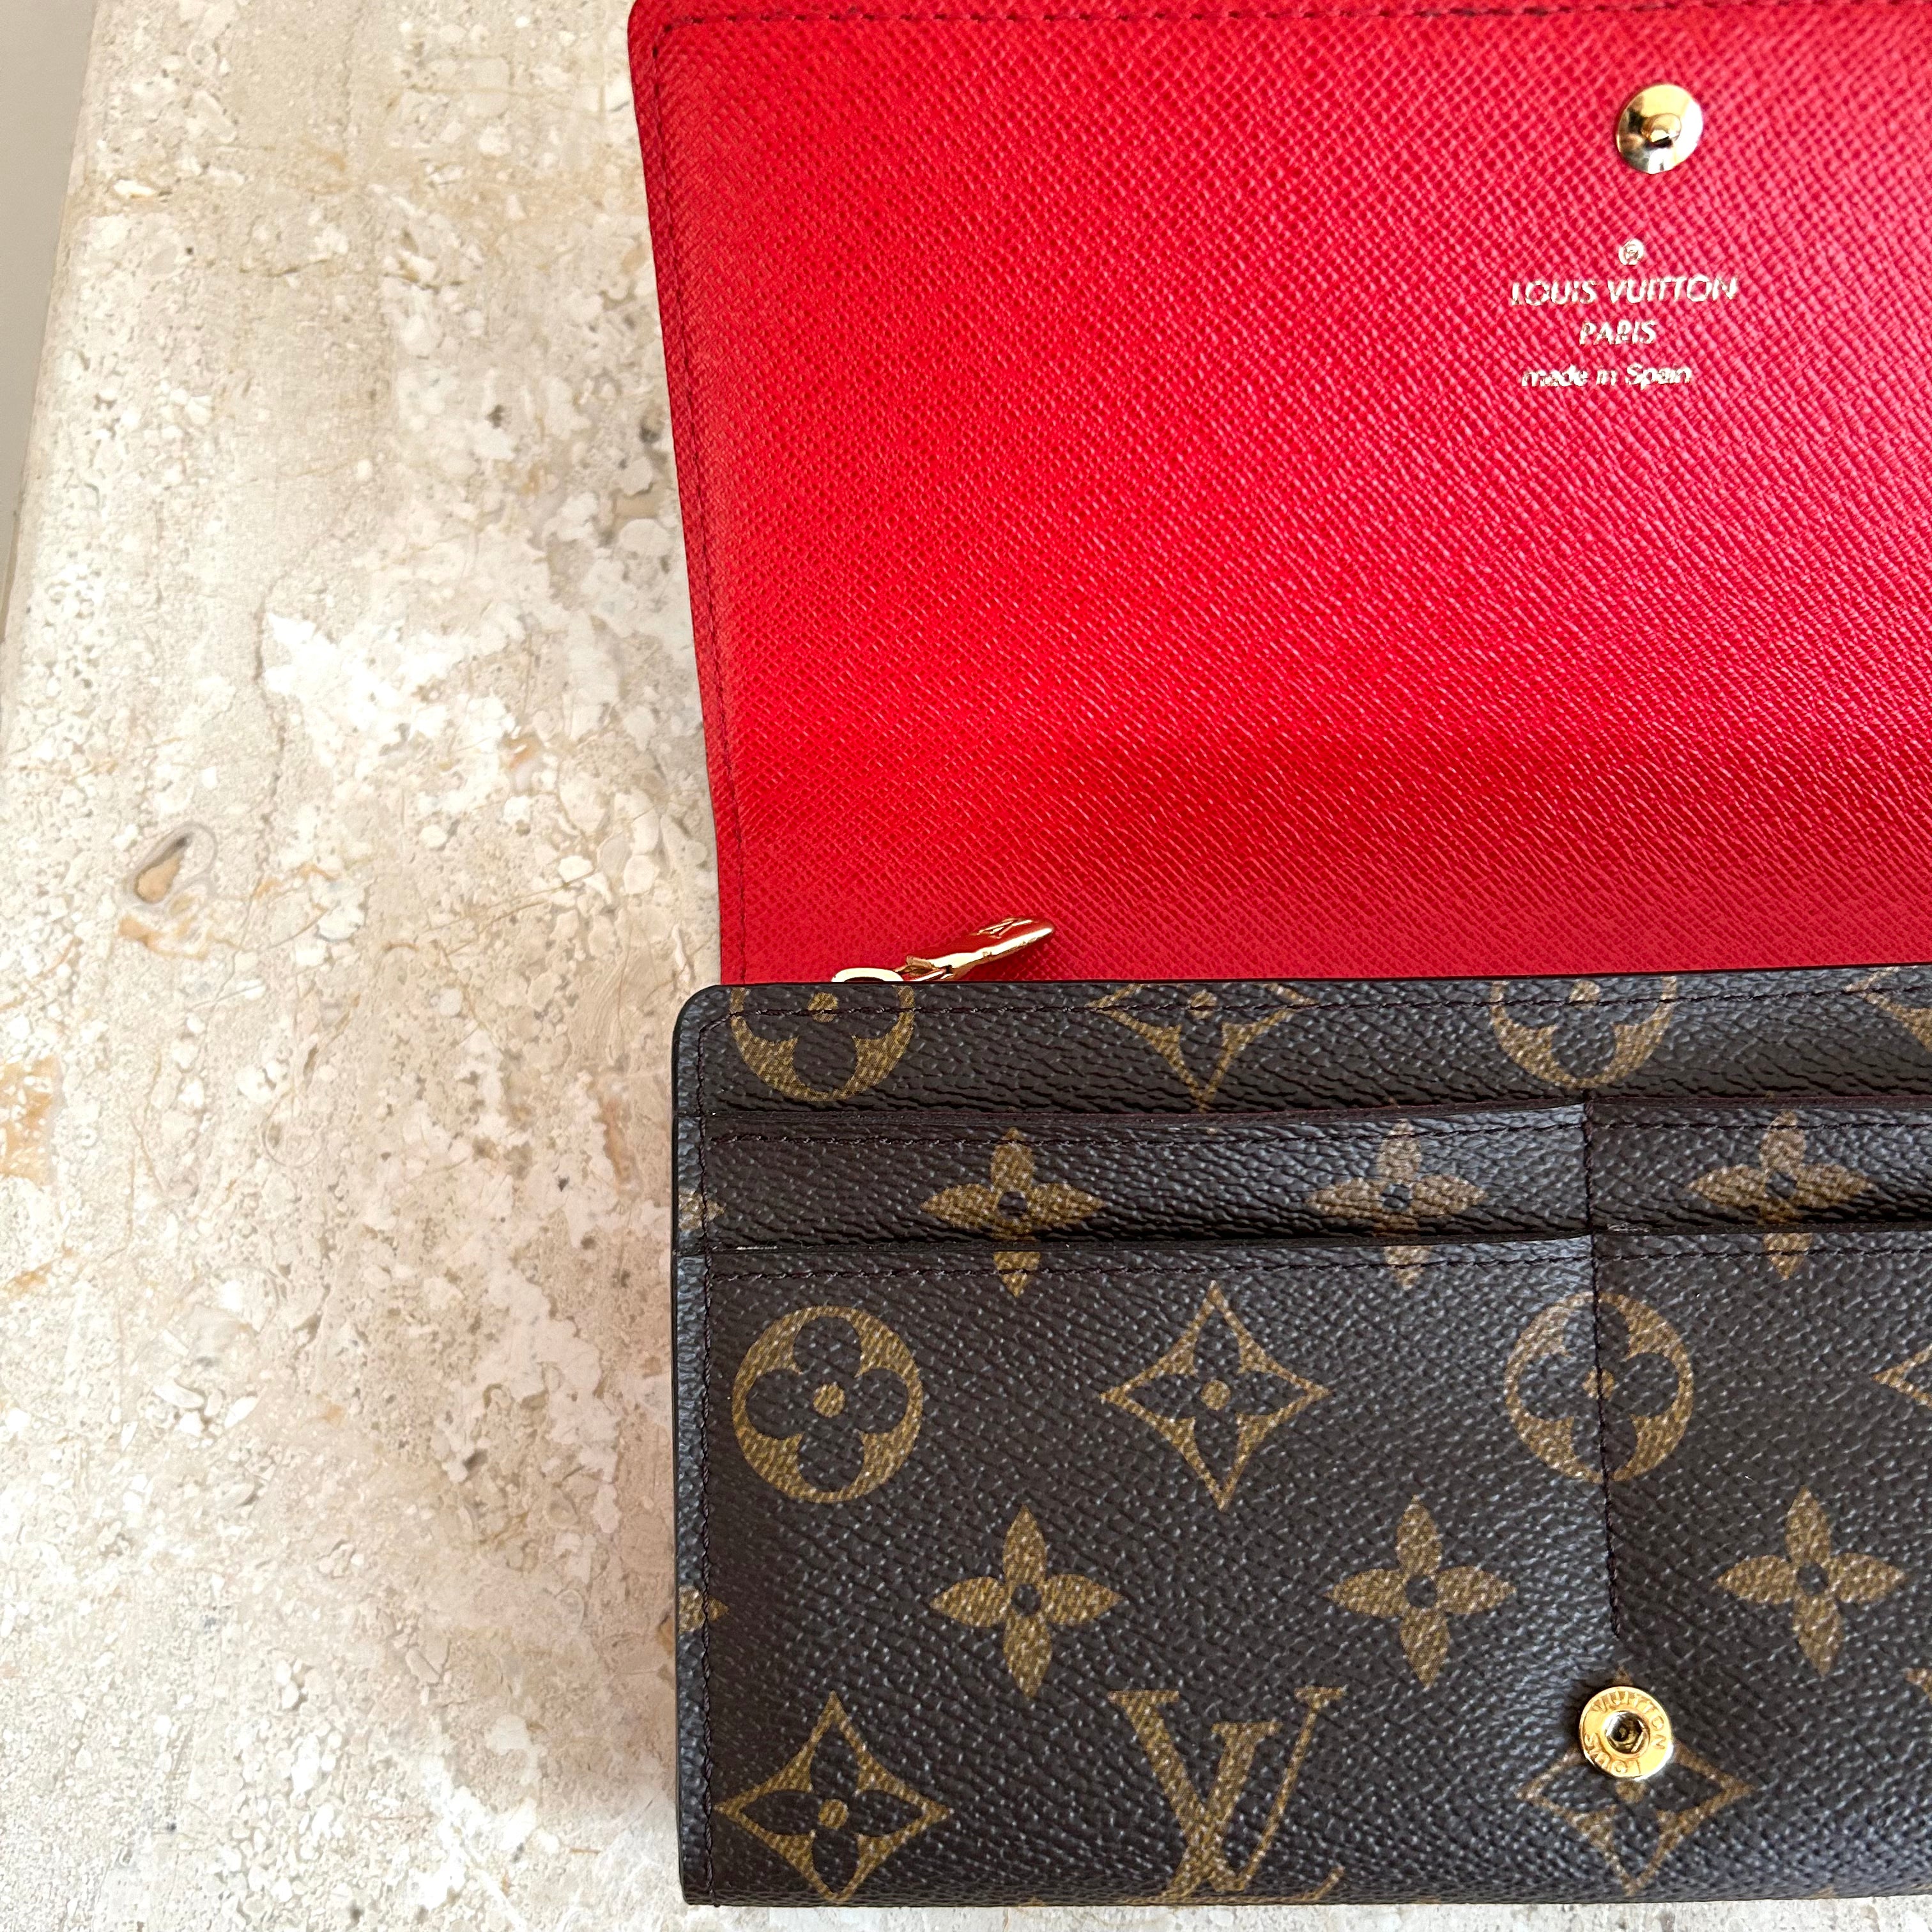 Pre-Owned LOUIS VUITTON Limited Edition Christmas Polar Bear Wallet